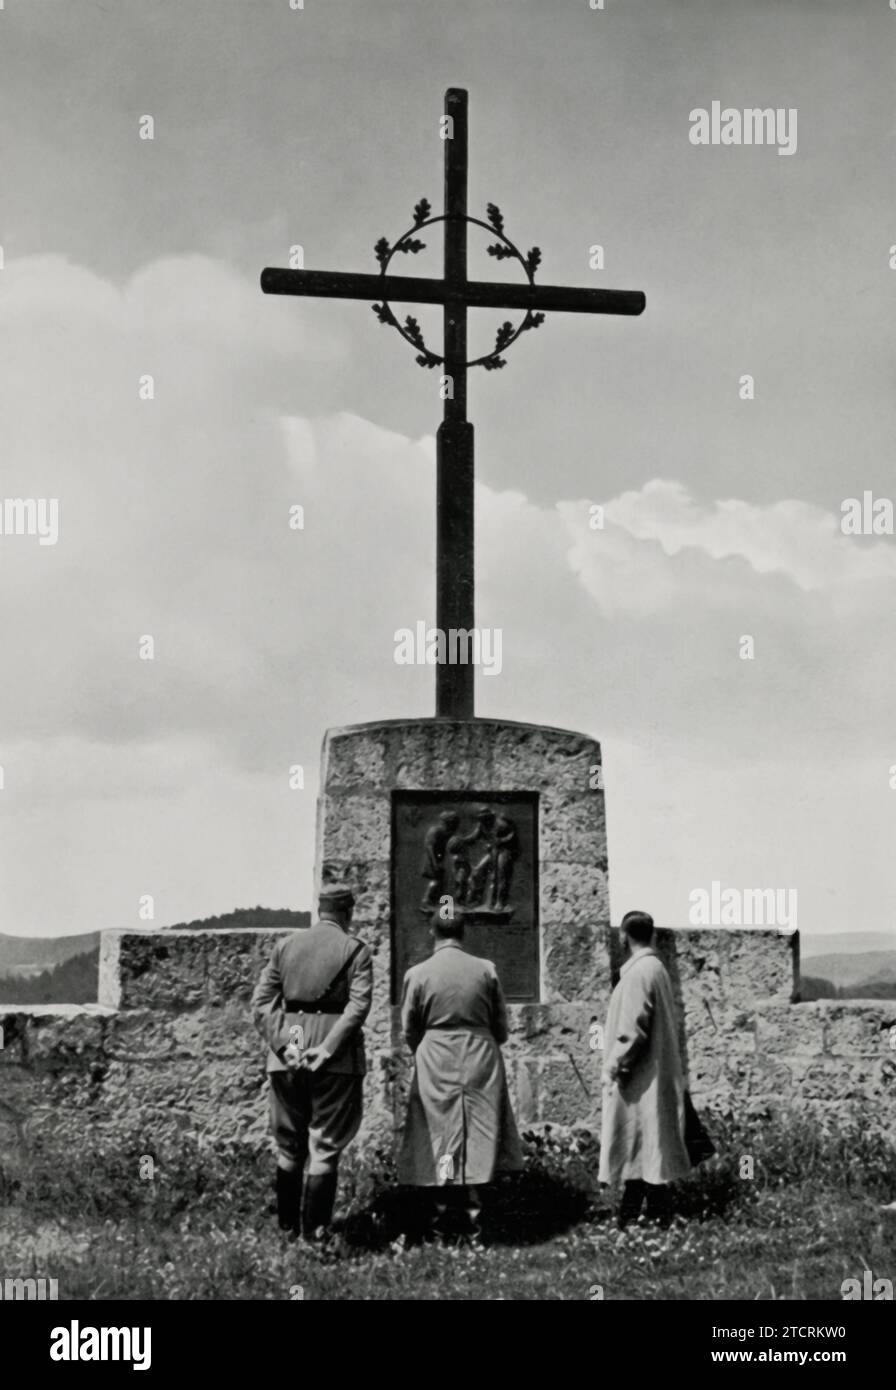 Adolf Hitler is shown in this photograph visiting the war memorial in Hiltpoltstein, Franconian Switzerland, captured in the image titled 'Der Führer in Franklen.' The moment highlights a propagandistic display of remembrance and patriotism, with Hitler's presence at this significant site serving to reinforce the Nazi regime's narrative. Stock Photo